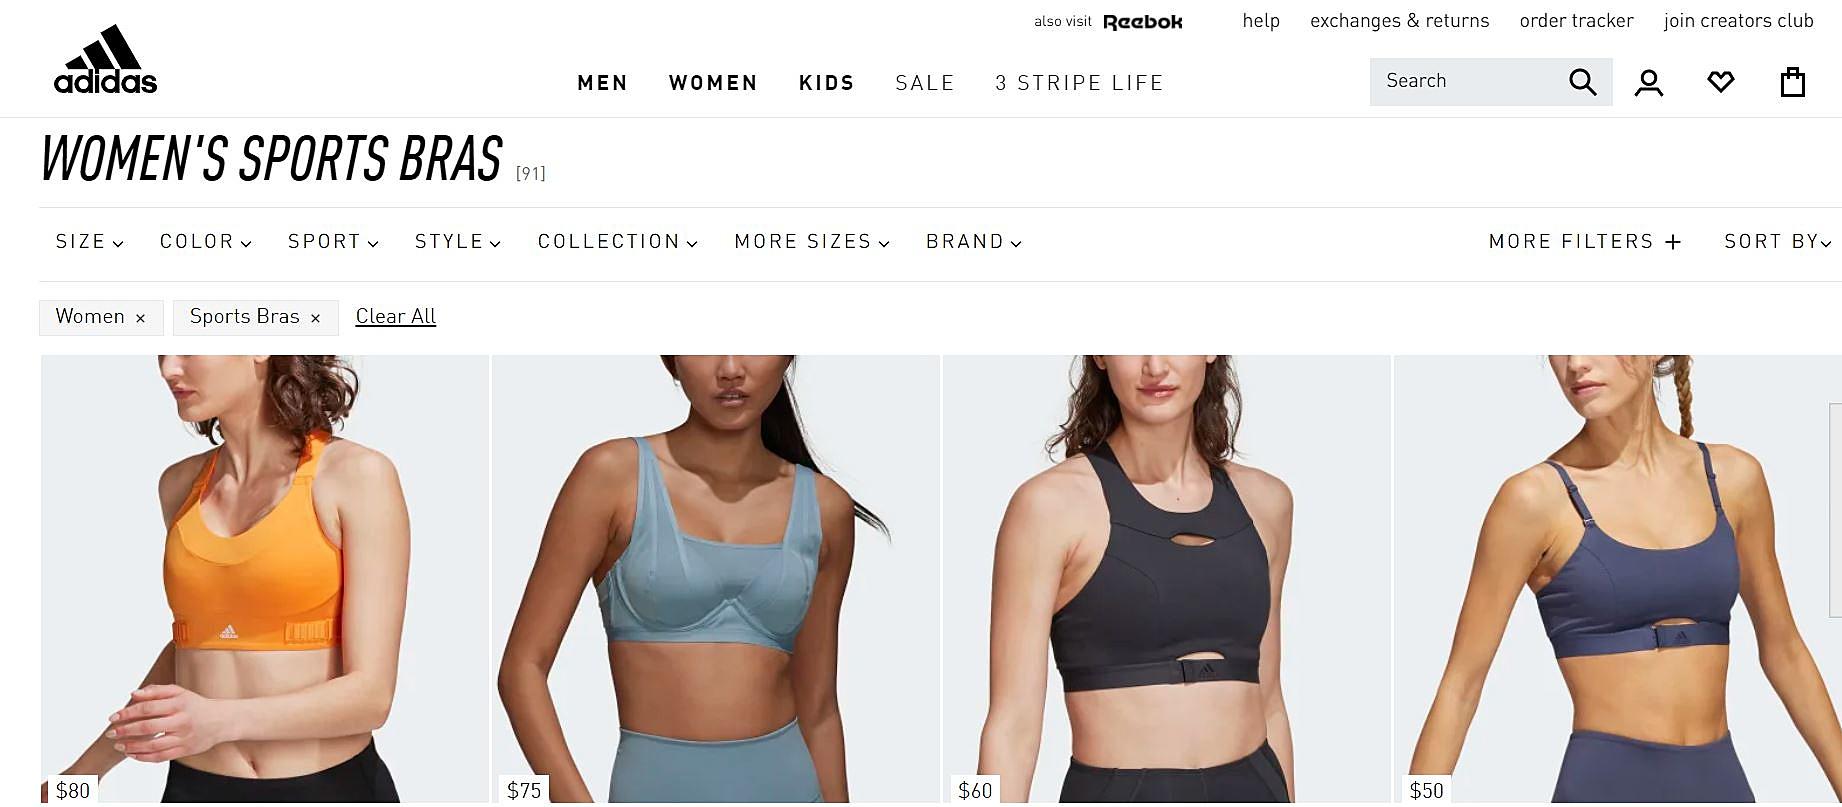 Adidas Shared Uncensored Topless Photos To Promote New Sports Bra – Edgy Or  Exploitative?